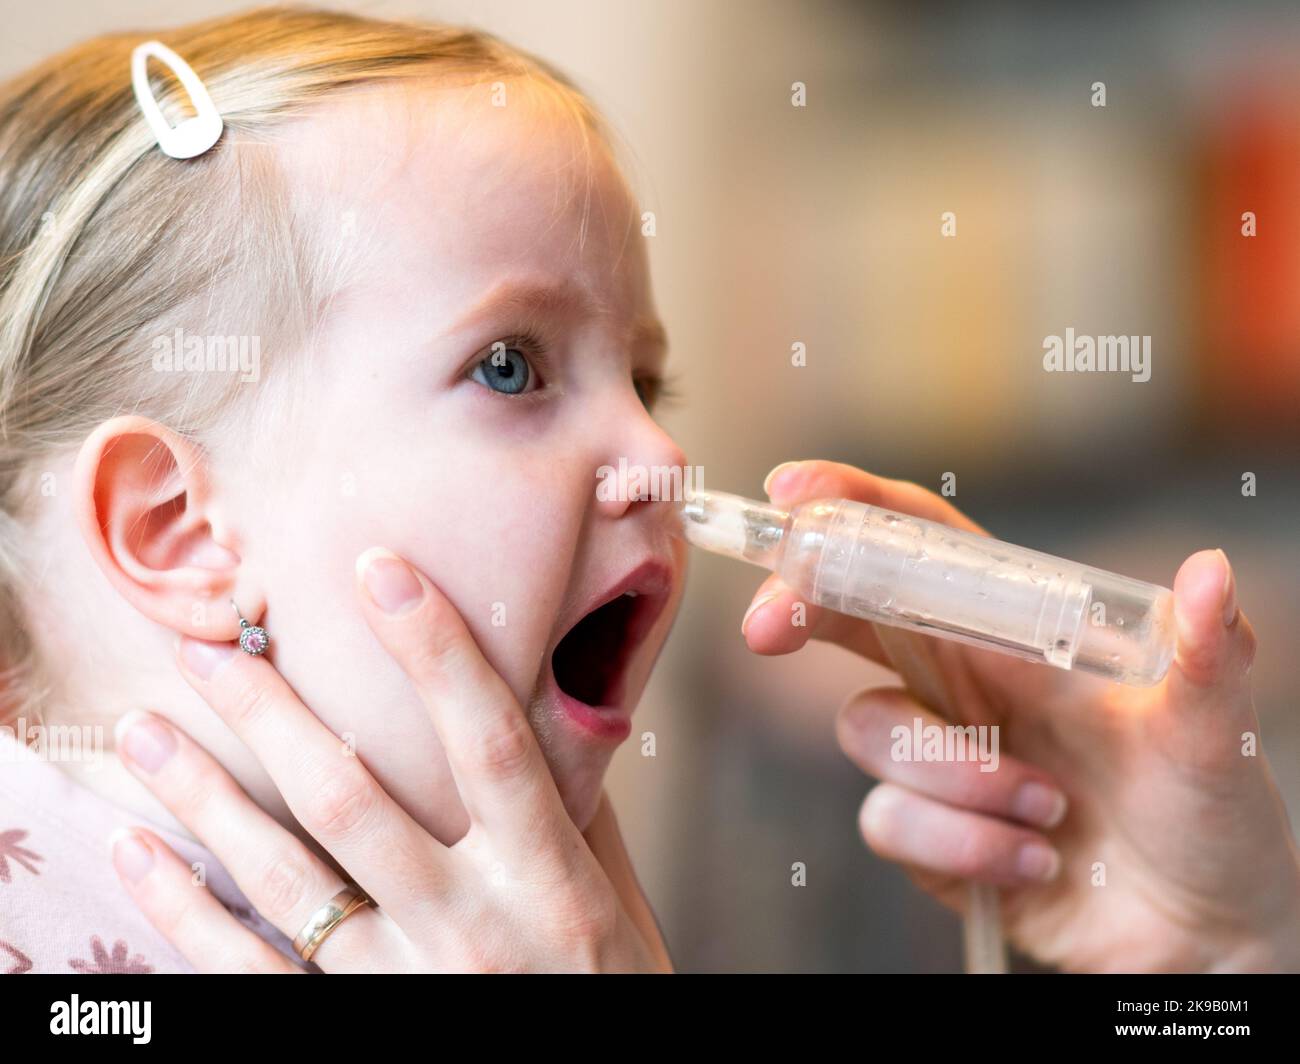 Mother cleaning baby nose. Nasal aspiration connected to vaccum cleaner Stock Photo